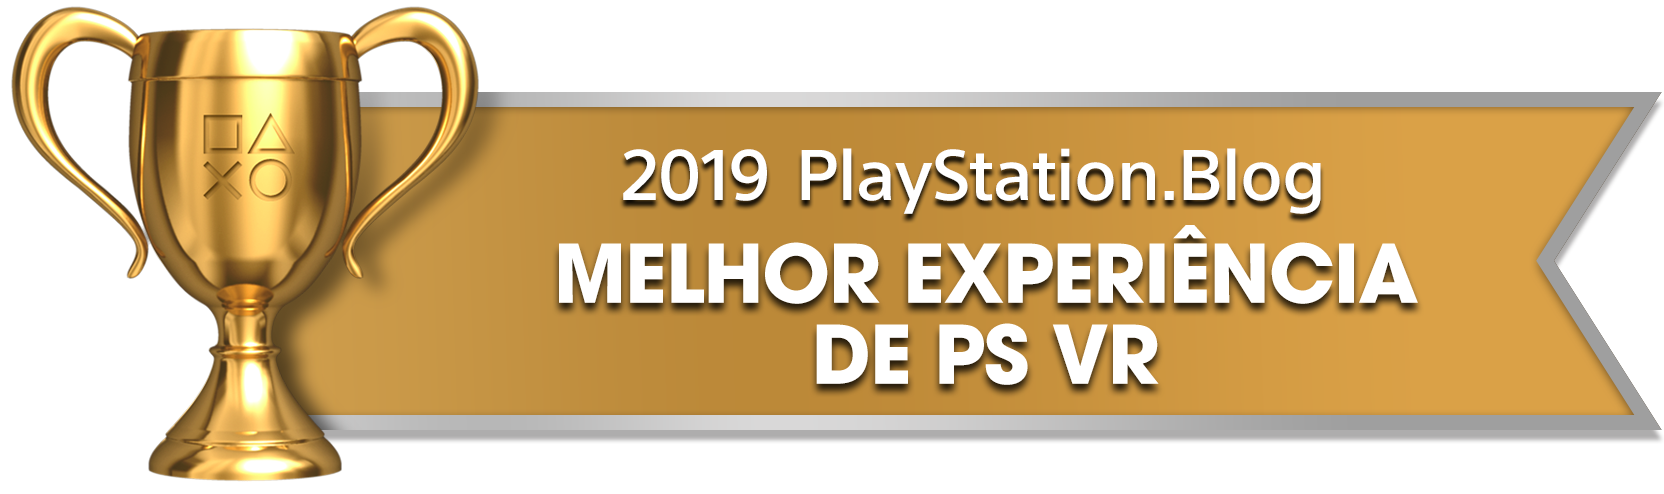 PS Blog Game of the Year 2019 - Best PS VR Experience - 2 - Gold